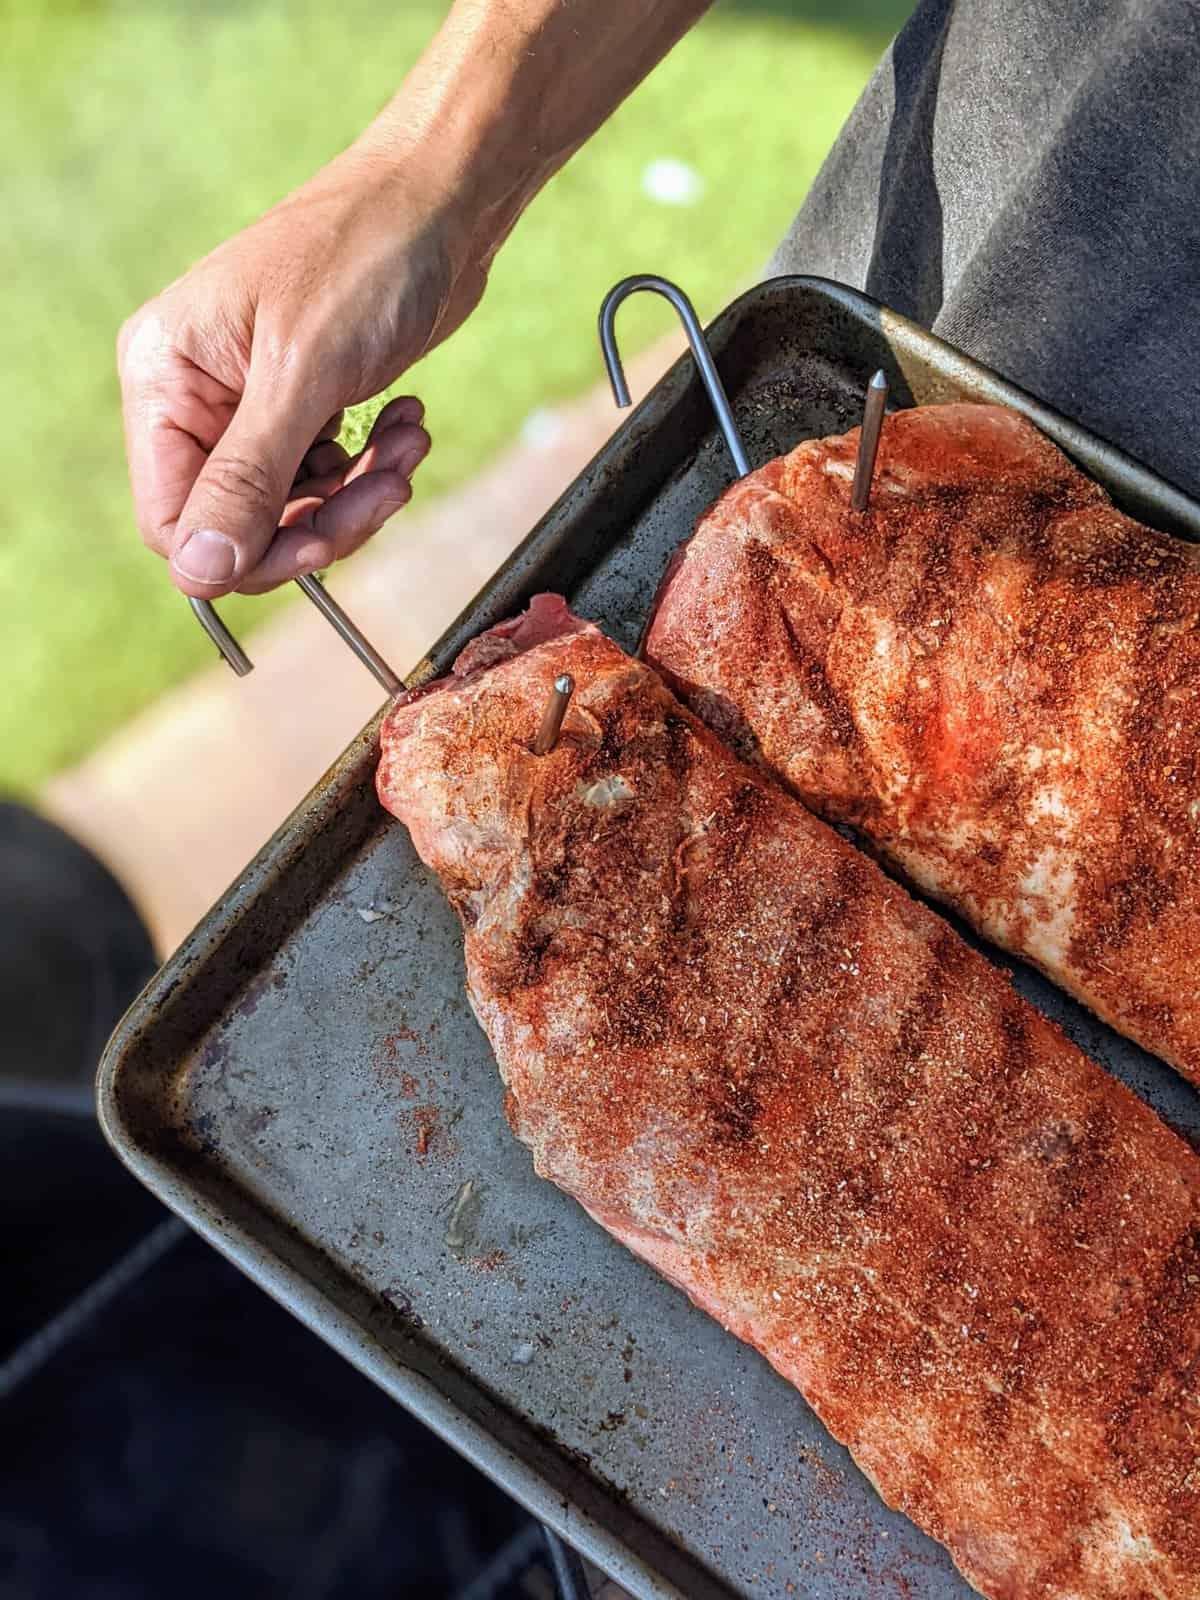 Pork ribs seasoned to go on the grill.